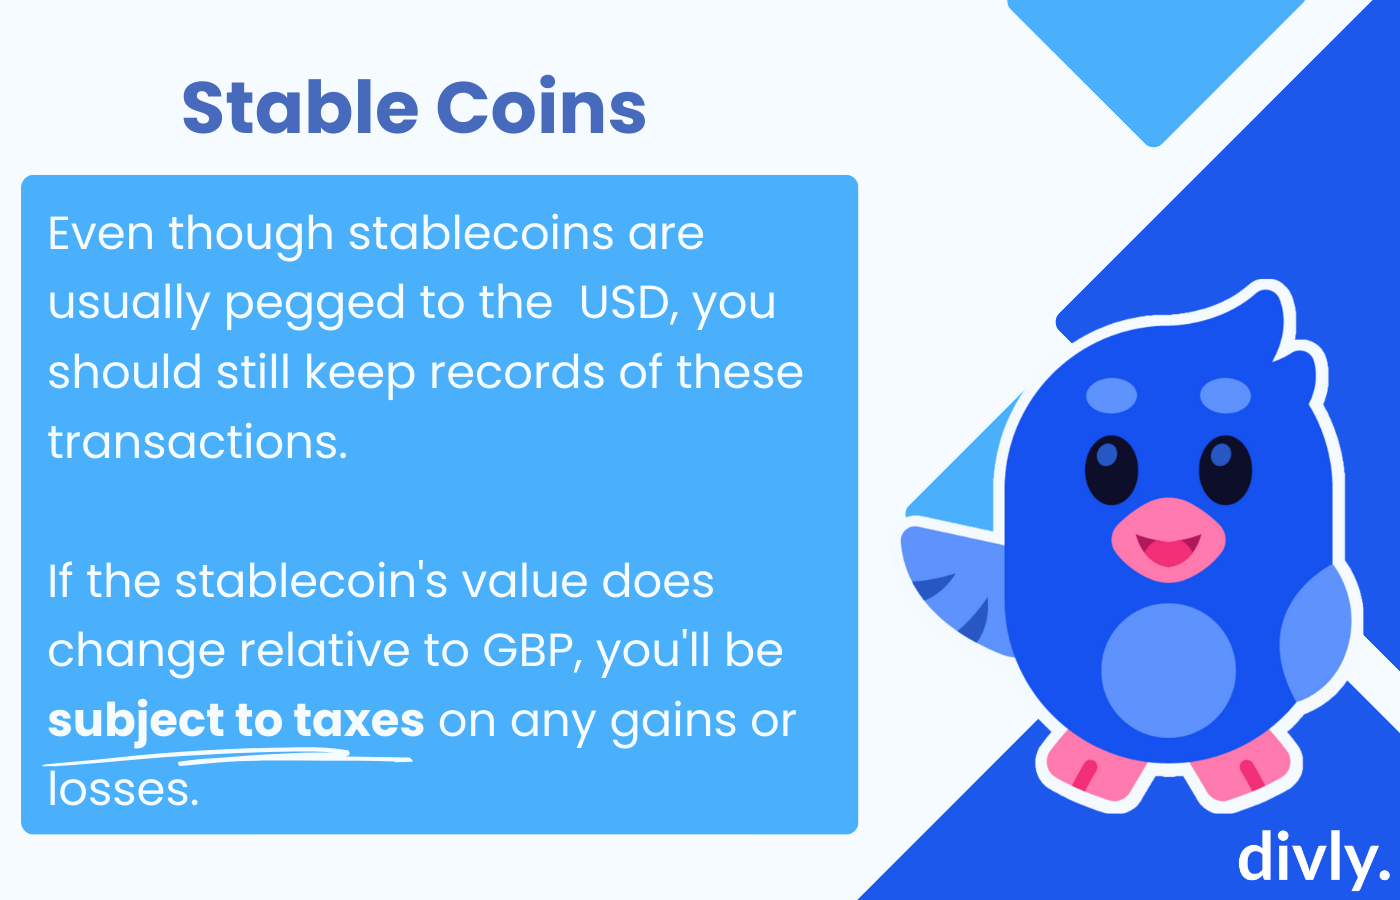 Stablecoins are still taxed. Watched out if the stablecoin changes value relative to the GBP as this could result in taxable gains upon sale.